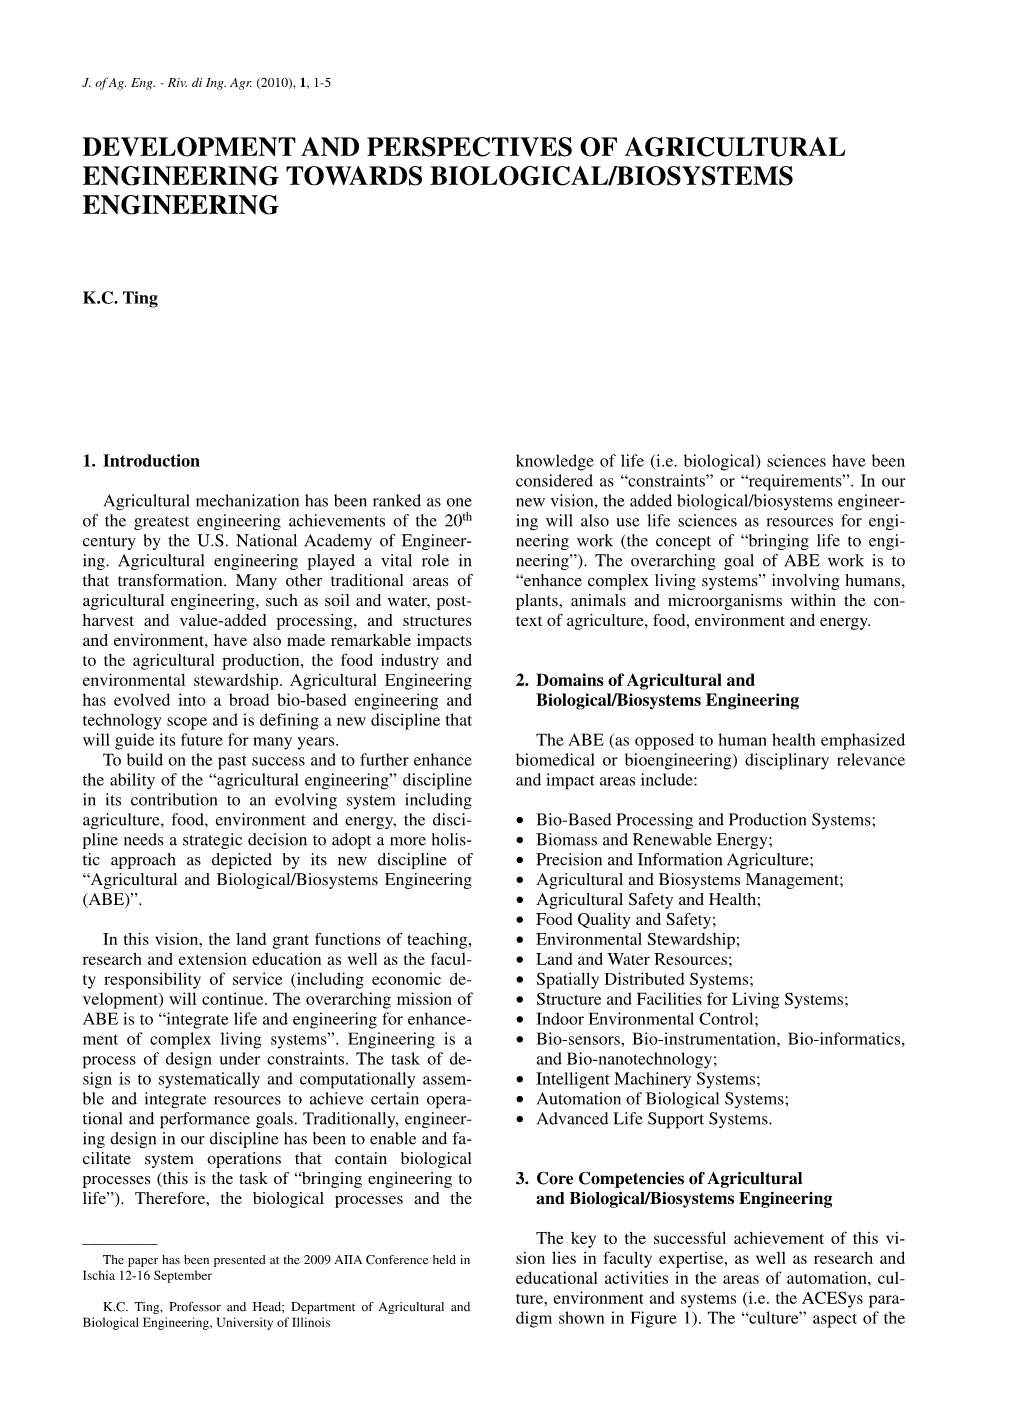 Development and Perspectives of Agricultural Engineering Towards Biological/Biosystems Engineering